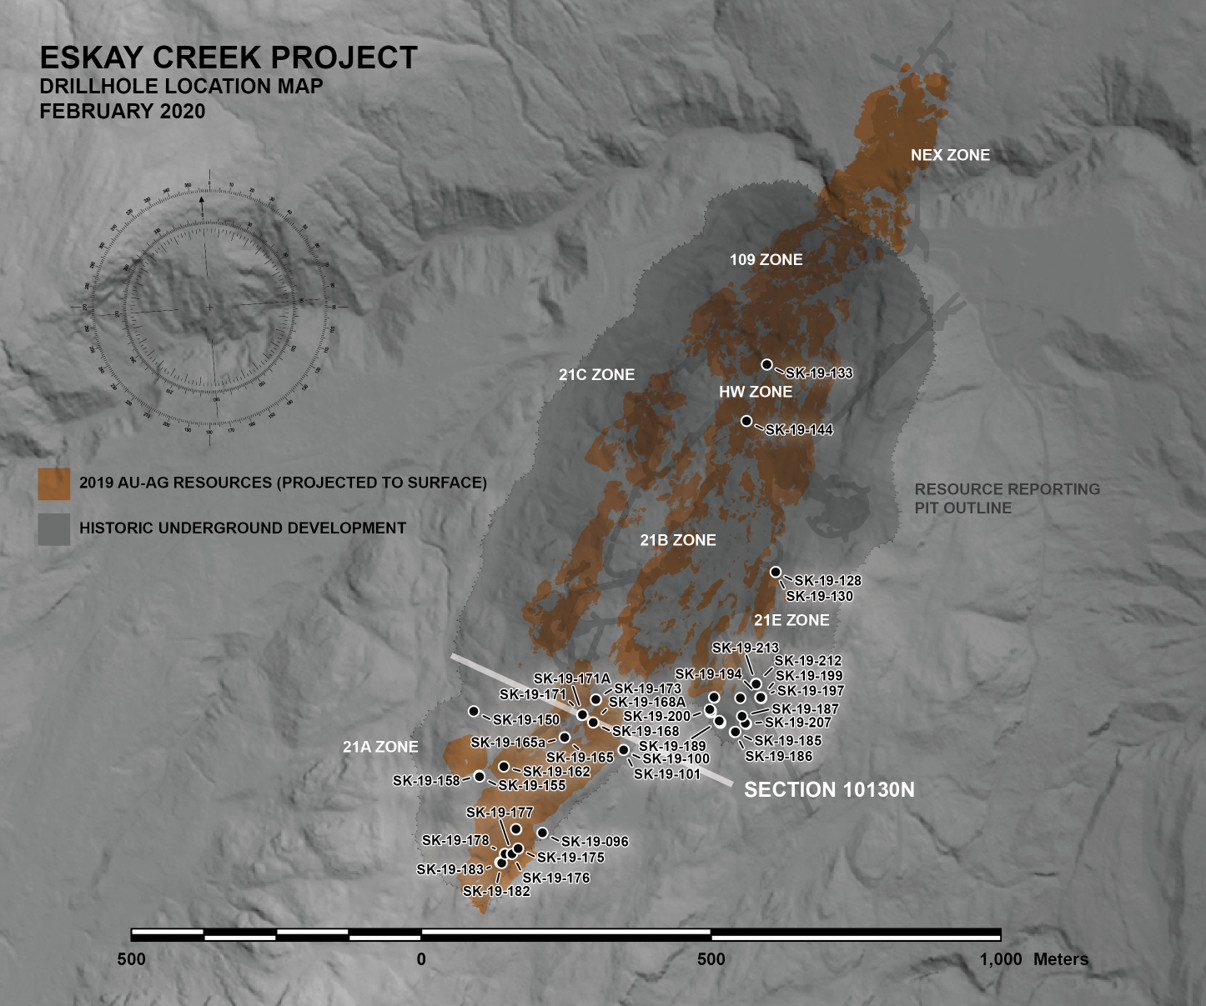 Skeena Resources Limited, Tuesday, February 11, 2020, Press release picture